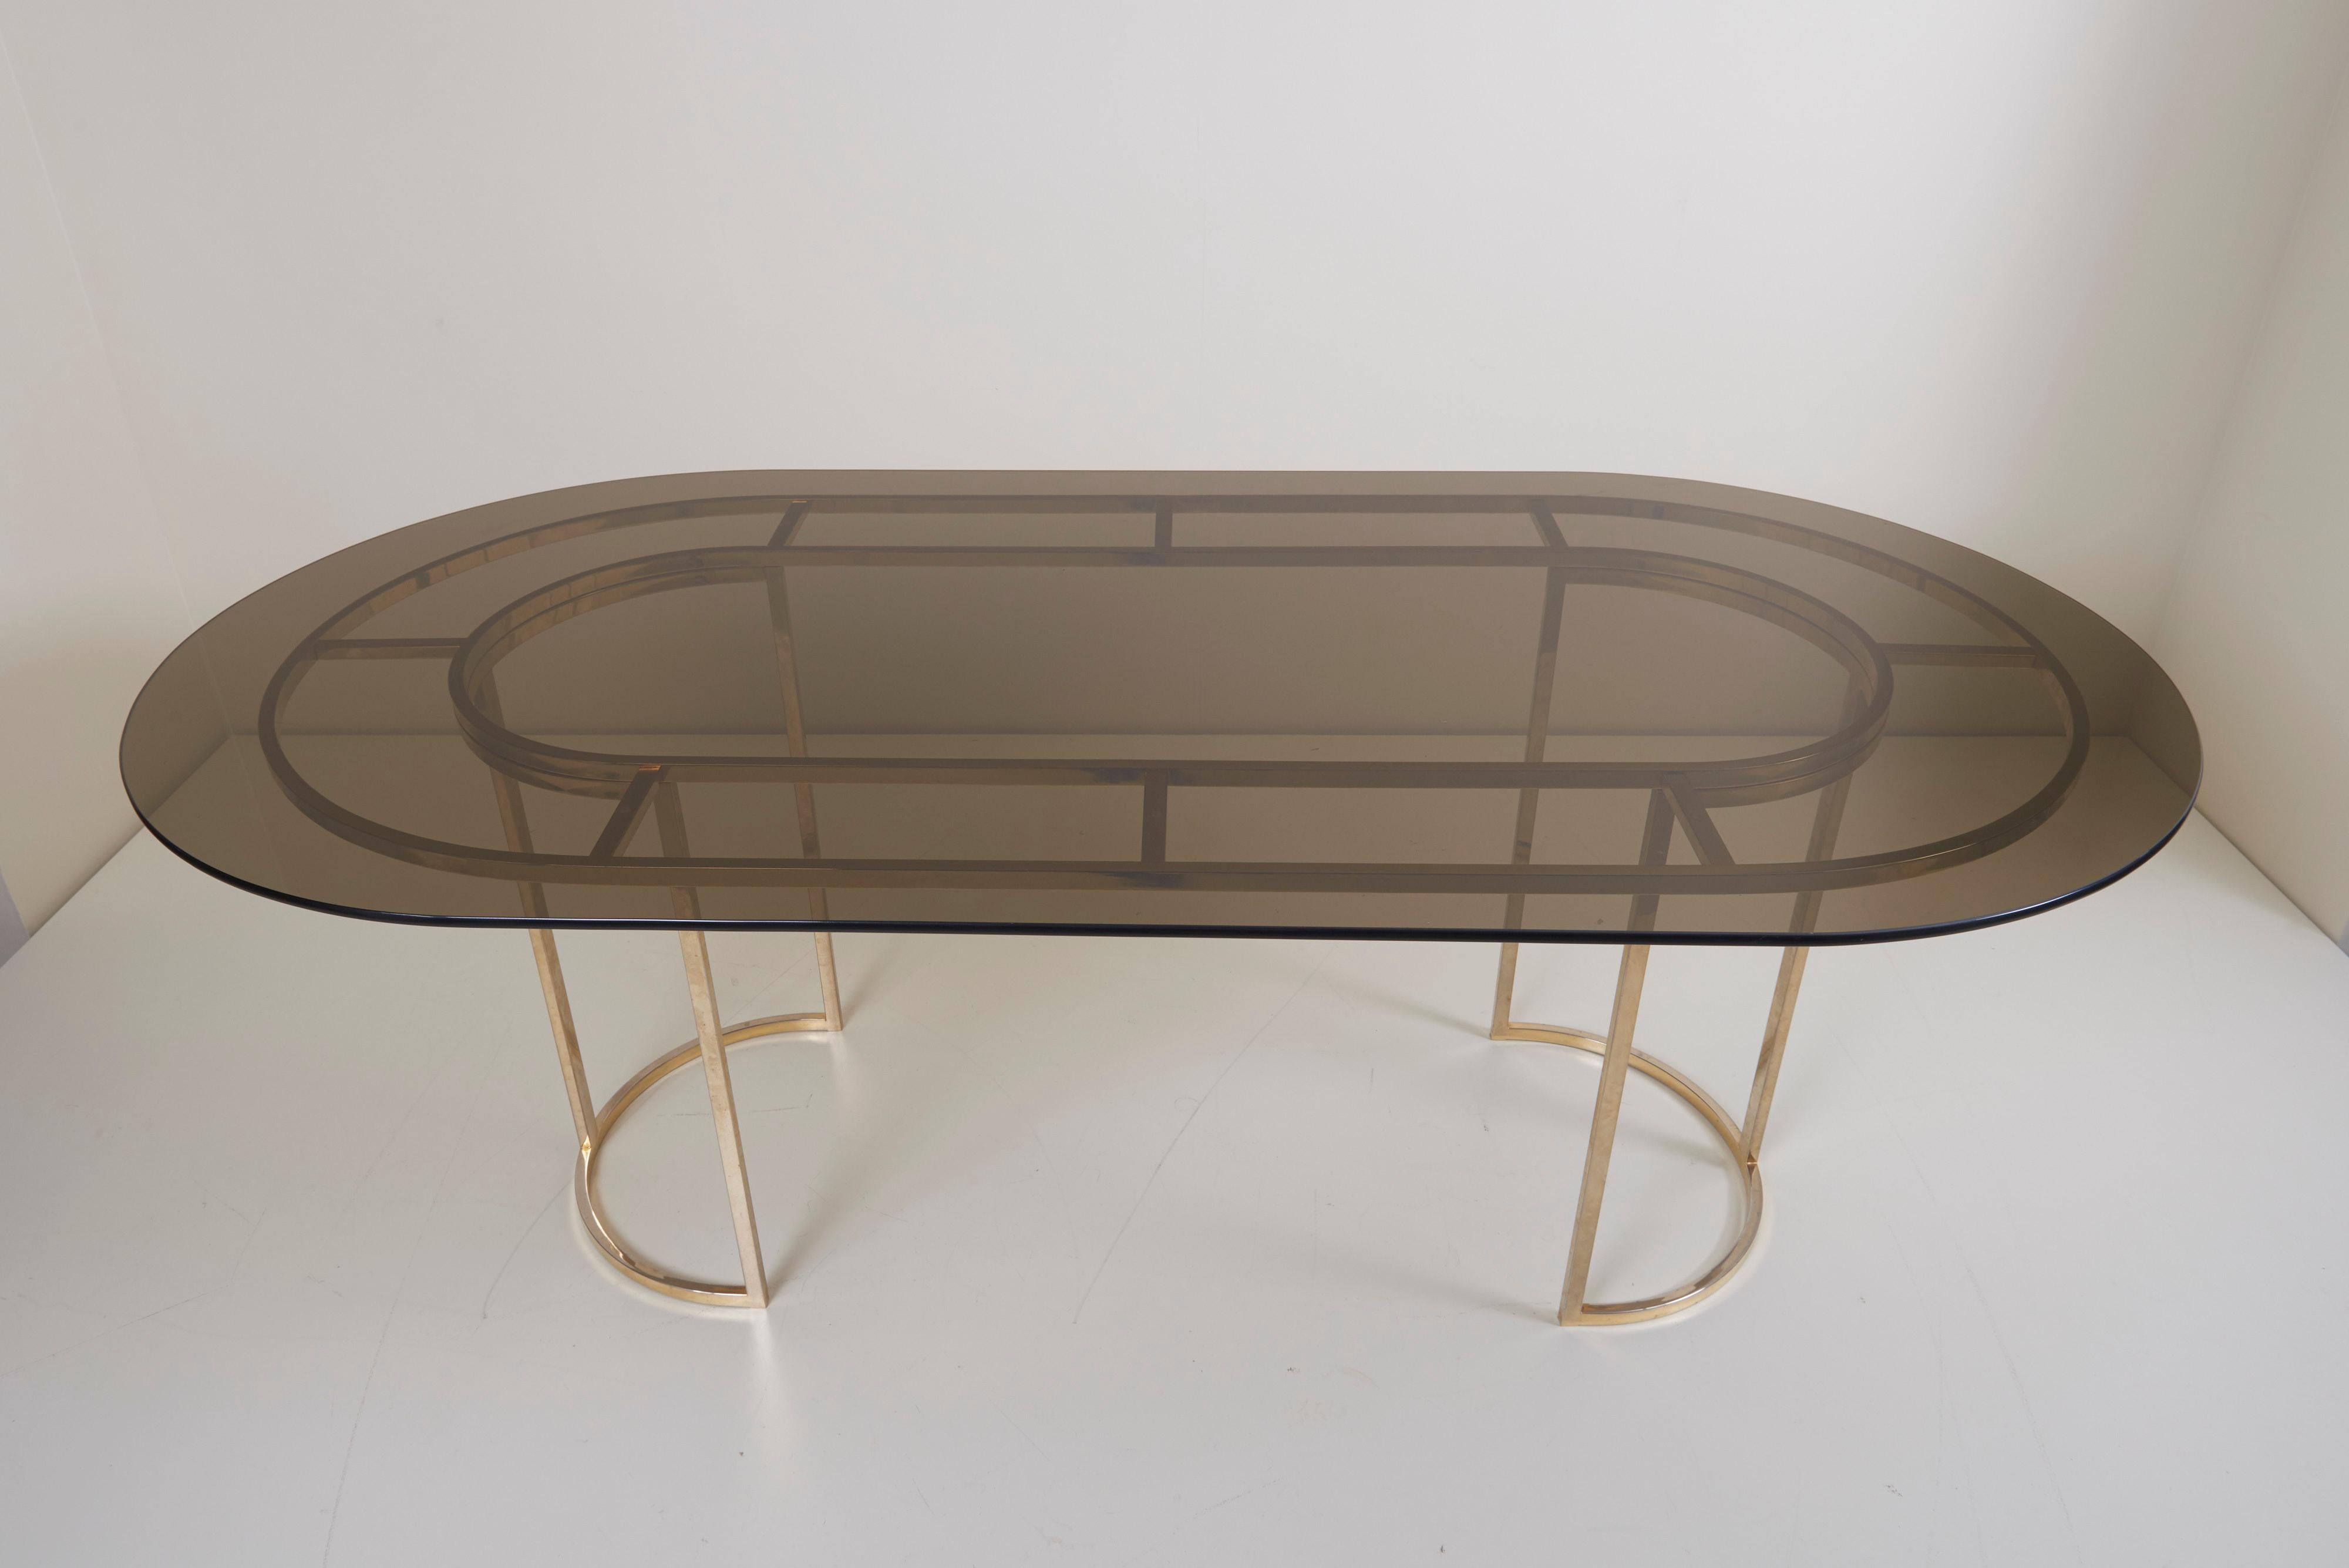 Beautiful large dining table in brass with a tinted glass table top in the style of Romeo Rega. The table is in a very good condition. A set of matching chairs is also listed.